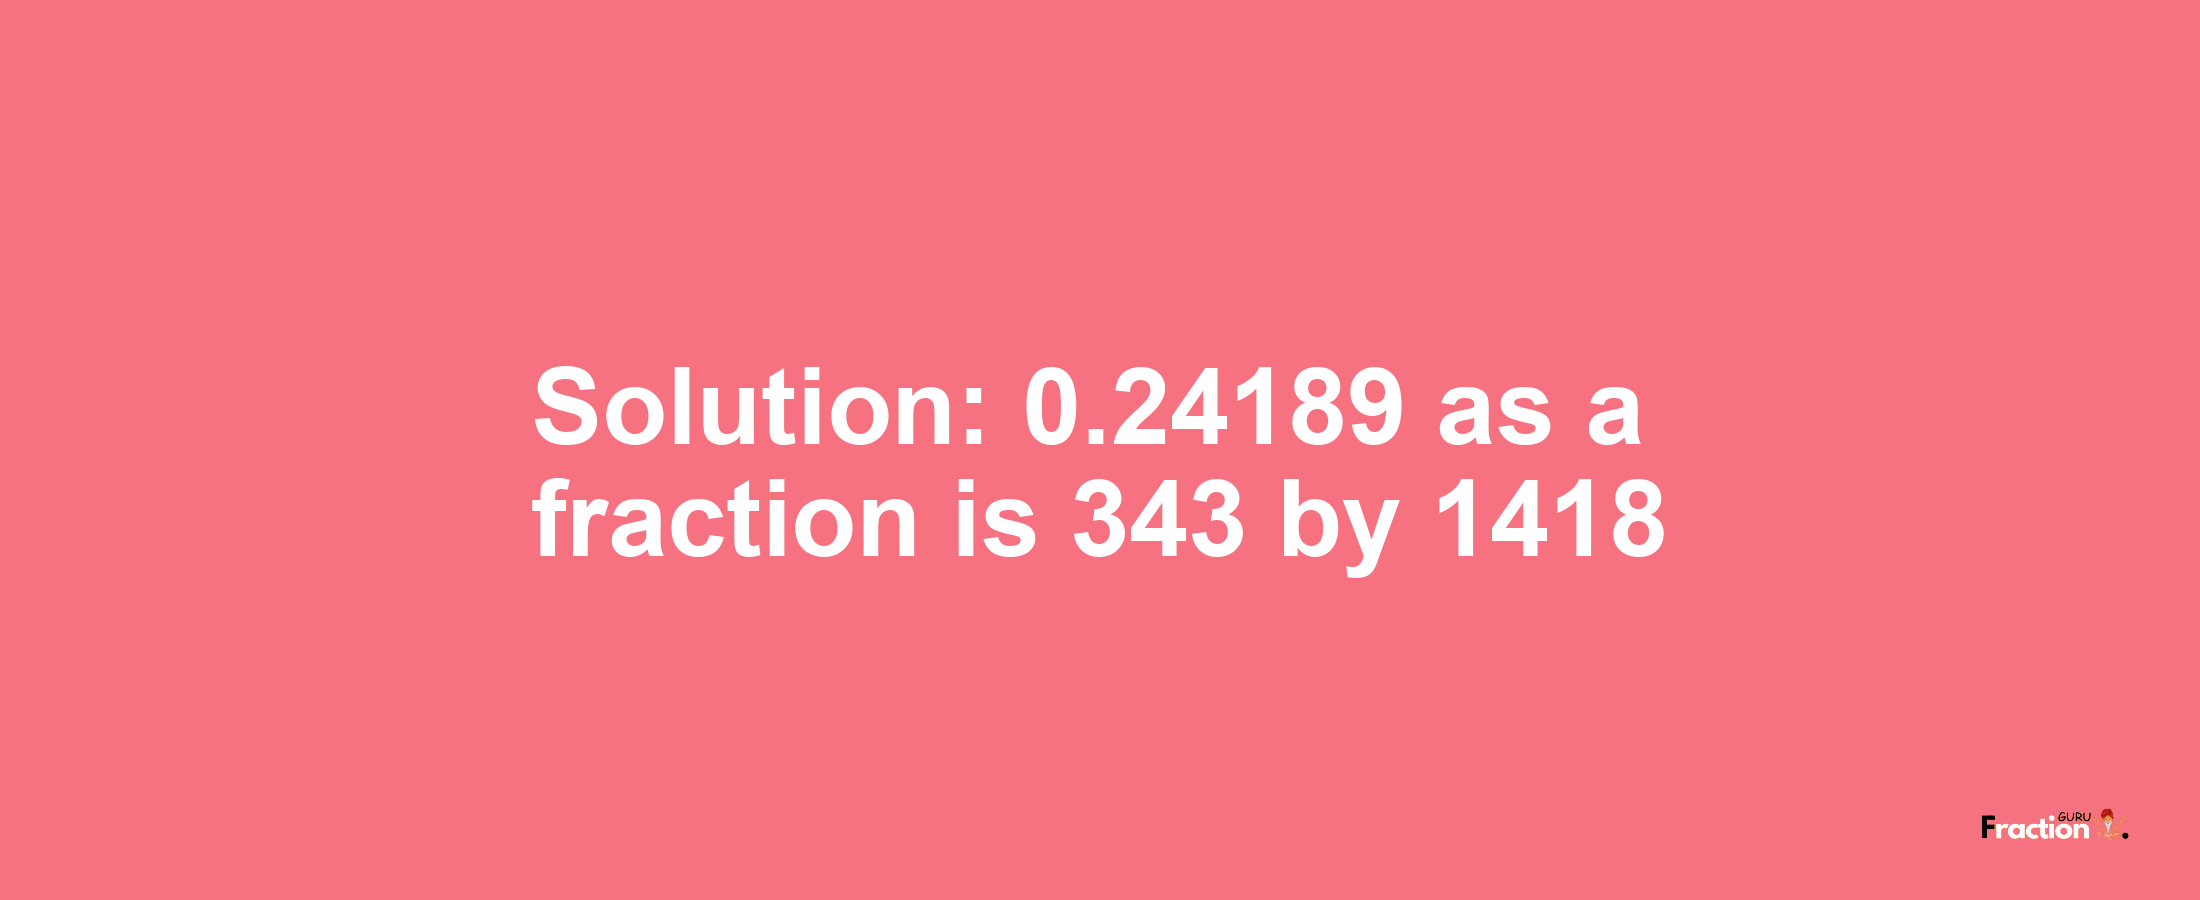 Solution:0.24189 as a fraction is 343/1418